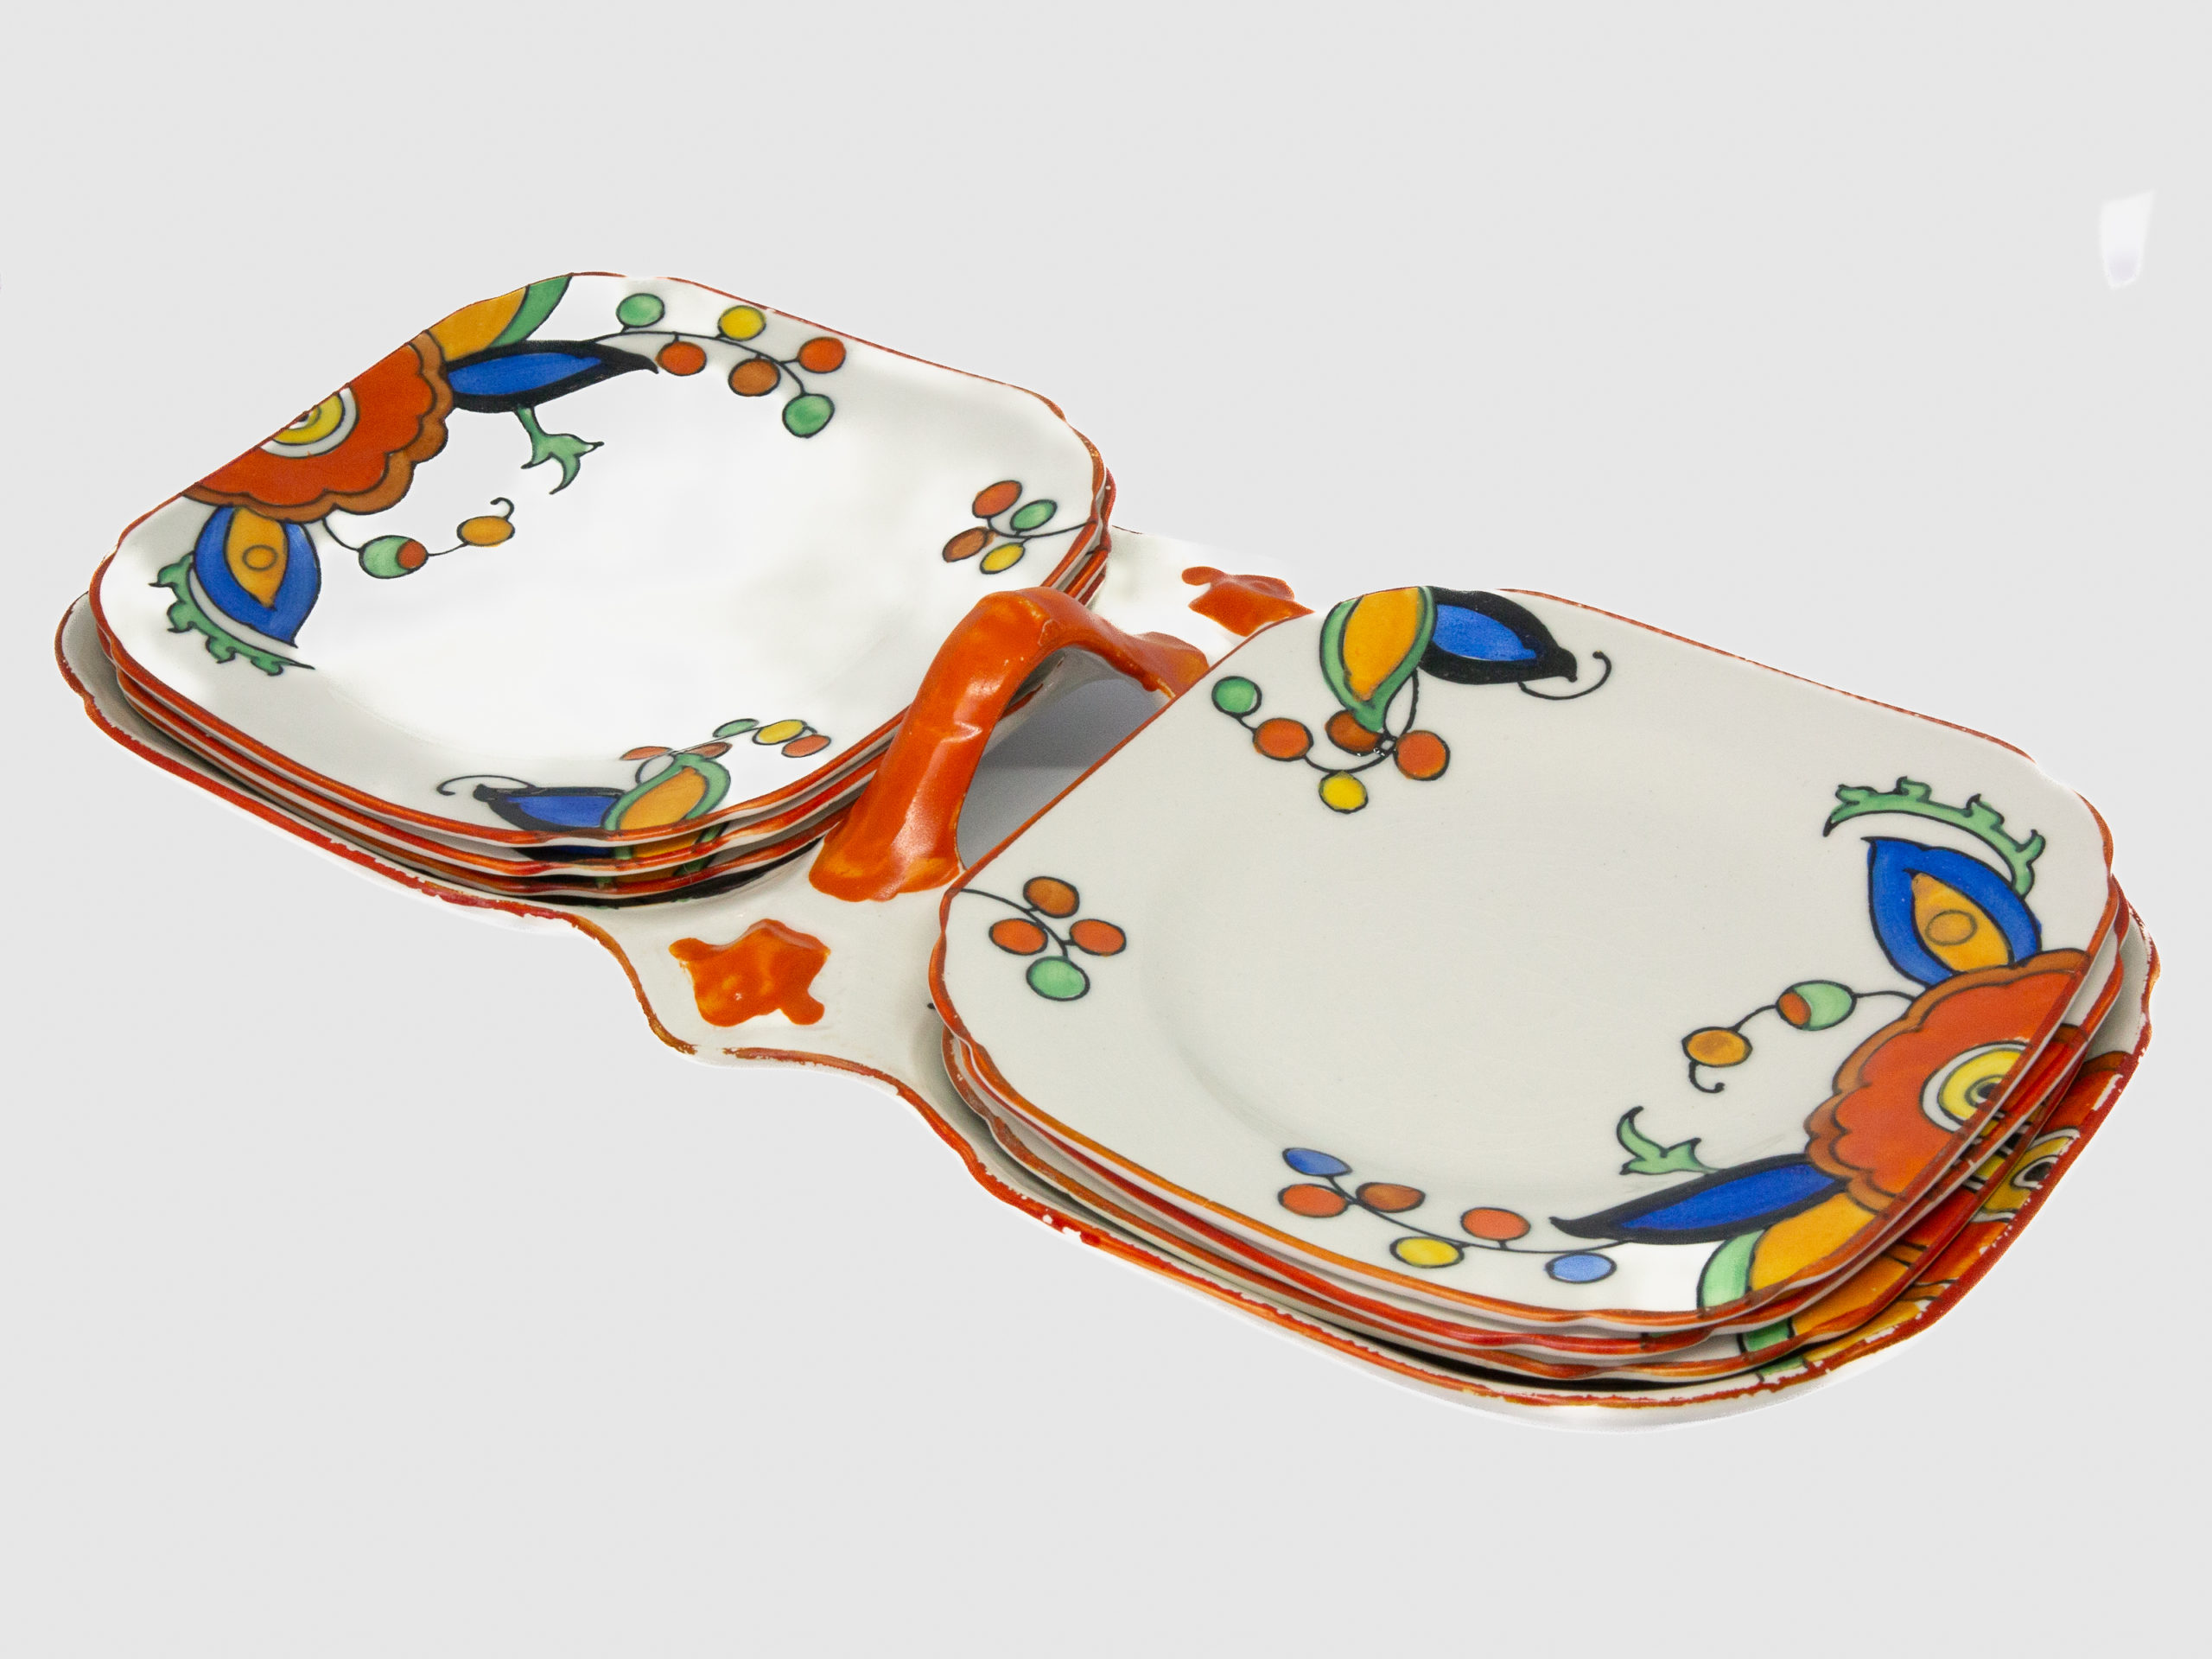 Art Deco sandwich set by Charlotte Rhead. A pretty and practical set comprising of a serving plate/tray with 2 shallow dish shaped plates connected with a handle to the centre and 6 small square side plates. Hand-painted in cheerful bright vibrant colours to cheer up any occasion. Design number 4133 'New Jazz' pattern c1928-1929. Each piece marked with the green Burleigh ware stamp with Rhead signature on the base of the serving plate. Visible crazing to each piece and some wear around the edge, especially around serving plate. Each small plate measure 145mm square and the serving plate/tray measures 330mm long,150mm wide and approximately 50mm tall by handle. Main photo showing the whole set as it comes with 3 side plates each on each side of the serving platter.